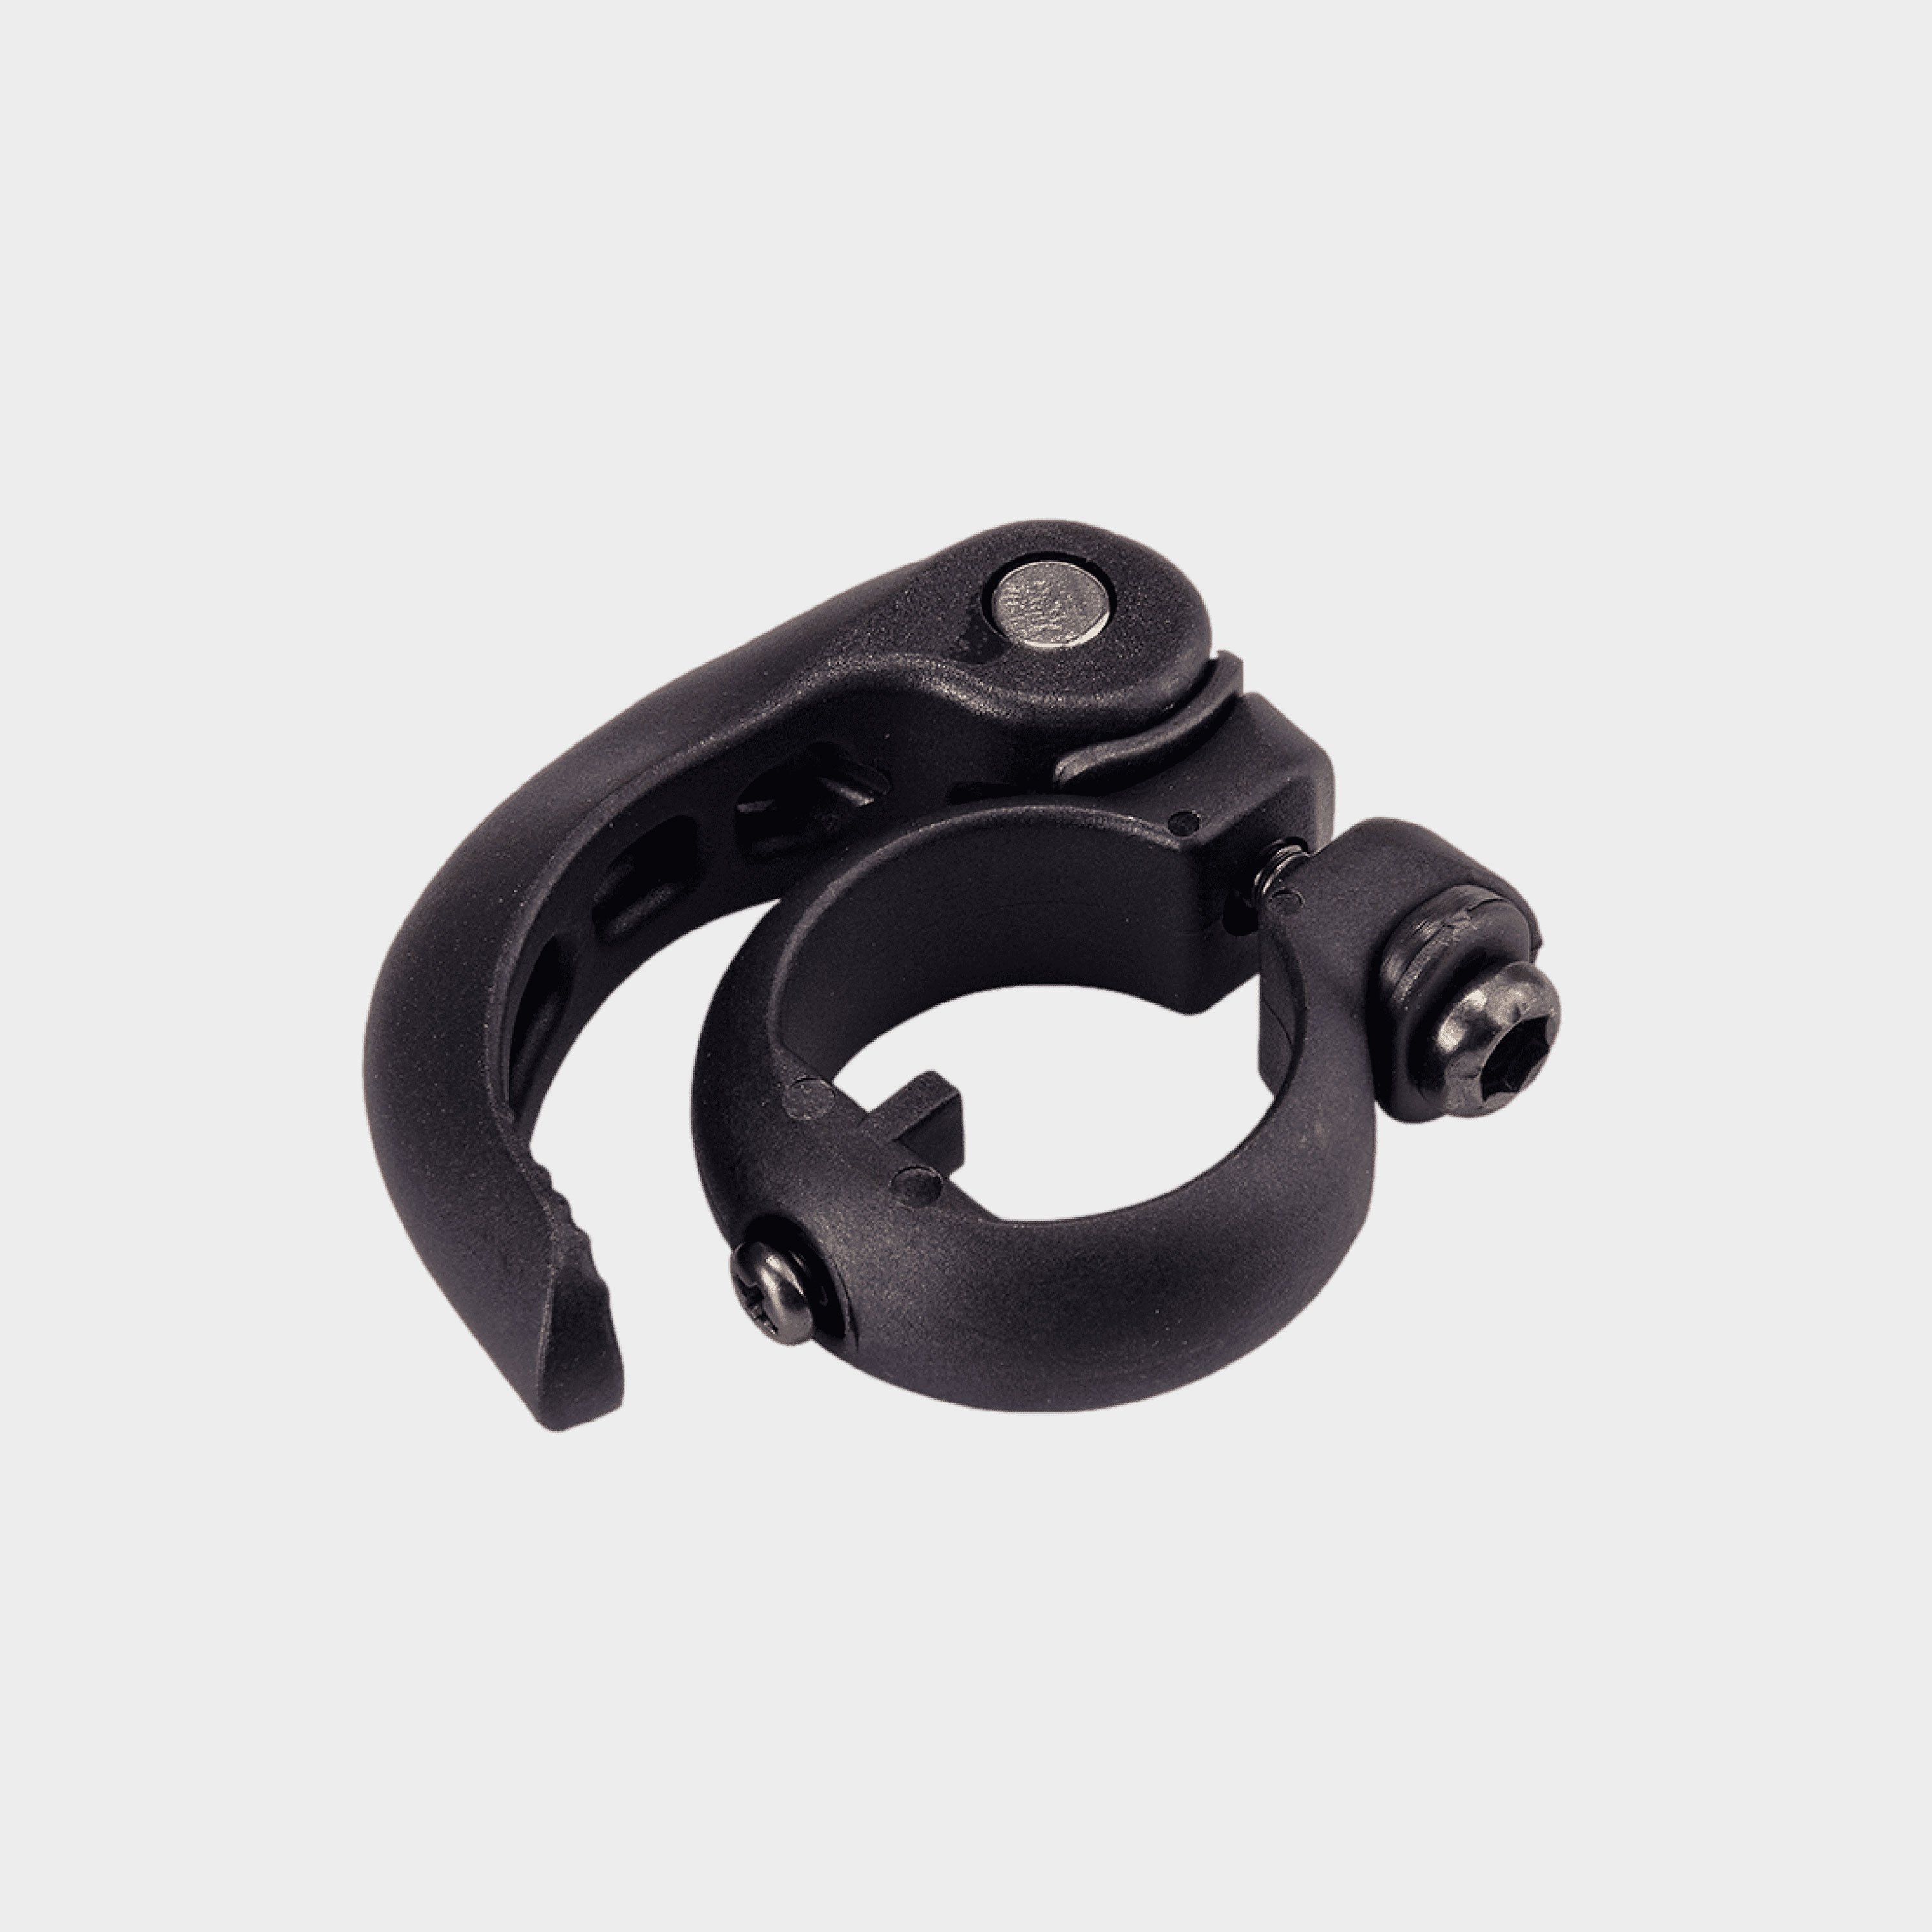 Mini Scooter Handle Bar Clamp